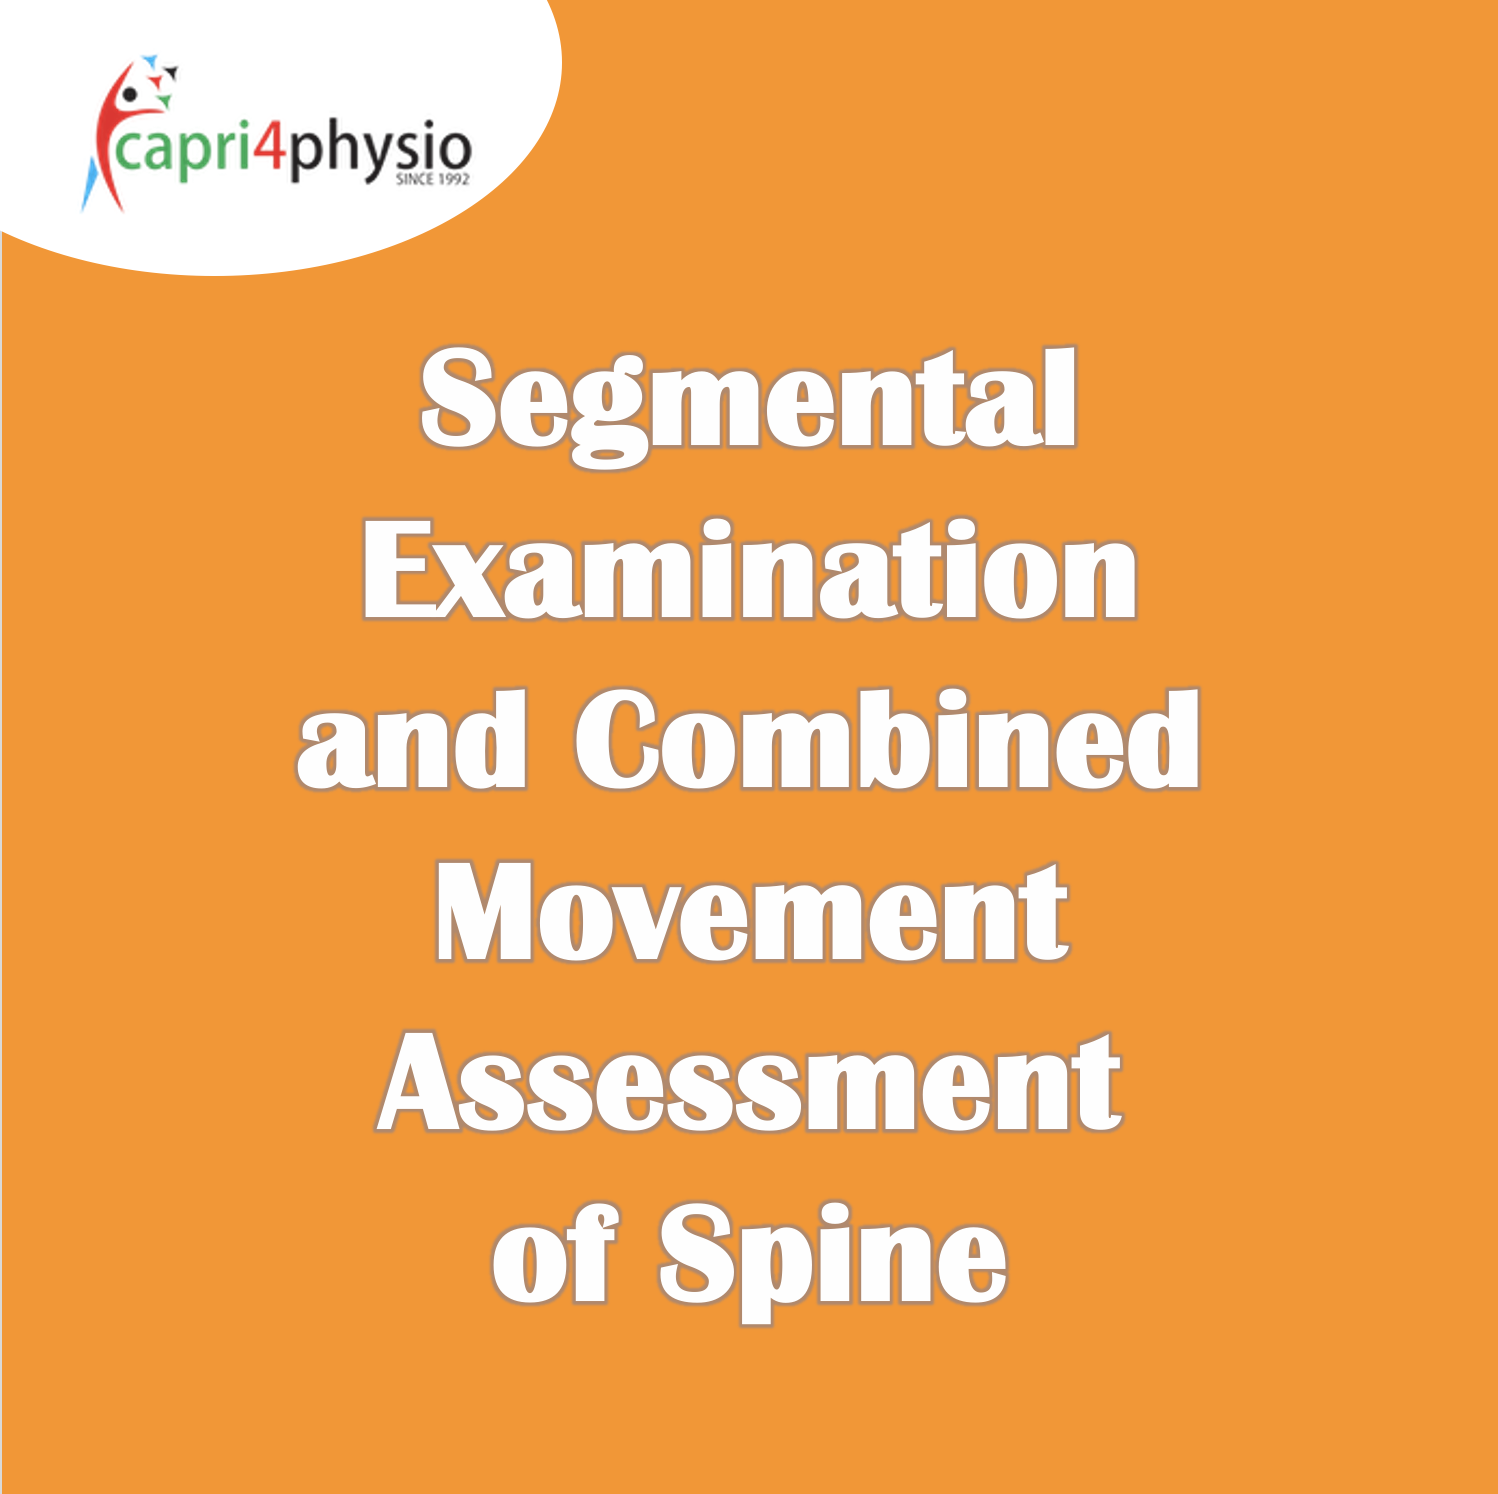 Segmental Examination and Combined Movement Assessment of Spine